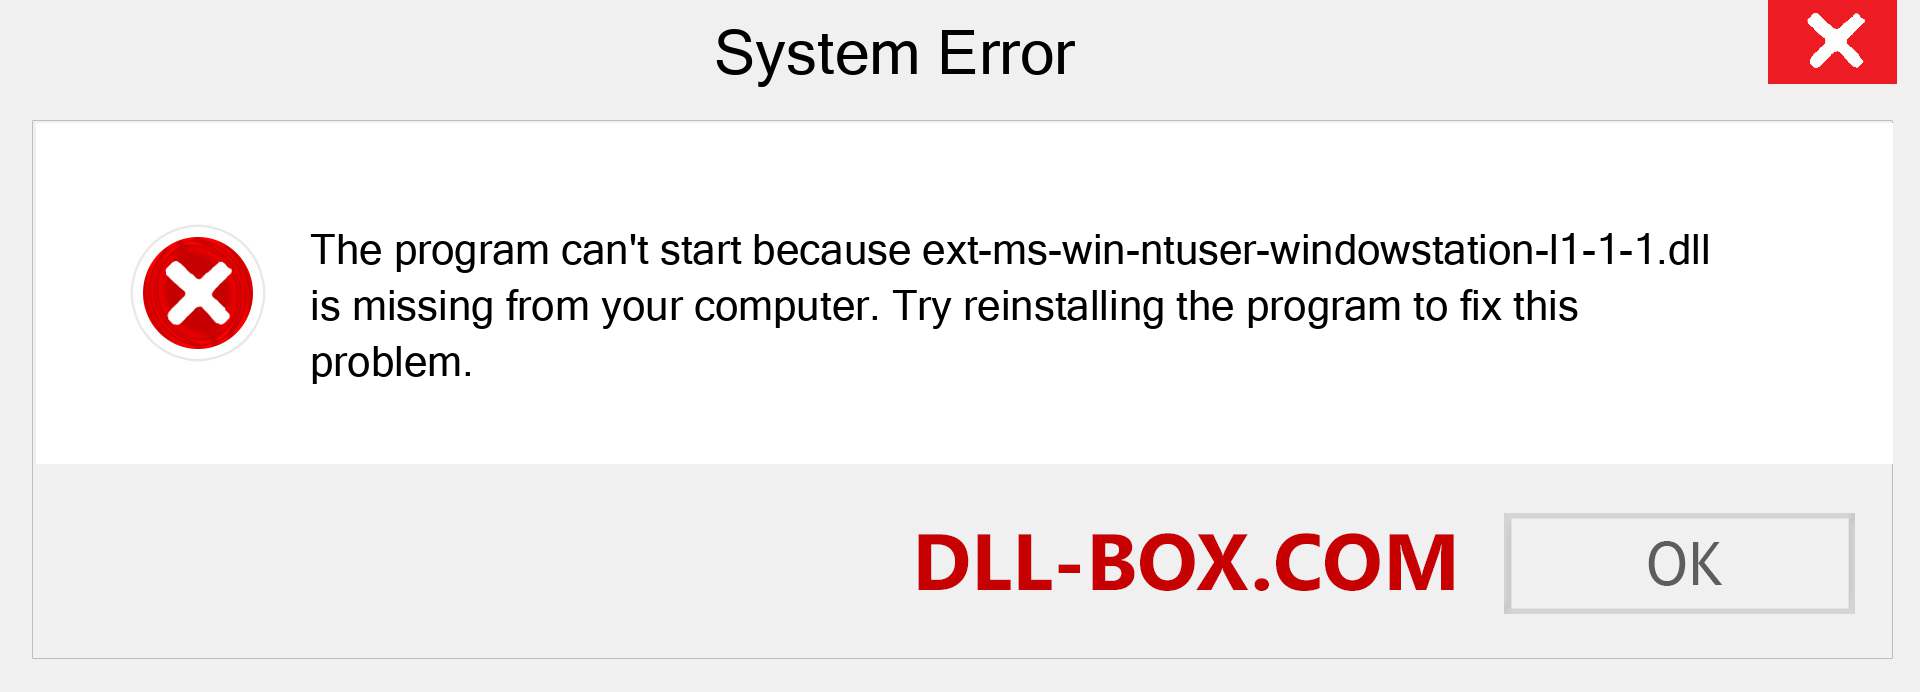  ext-ms-win-ntuser-windowstation-l1-1-1.dll file is missing?. Download for Windows 7, 8, 10 - Fix  ext-ms-win-ntuser-windowstation-l1-1-1 dll Missing Error on Windows, photos, images